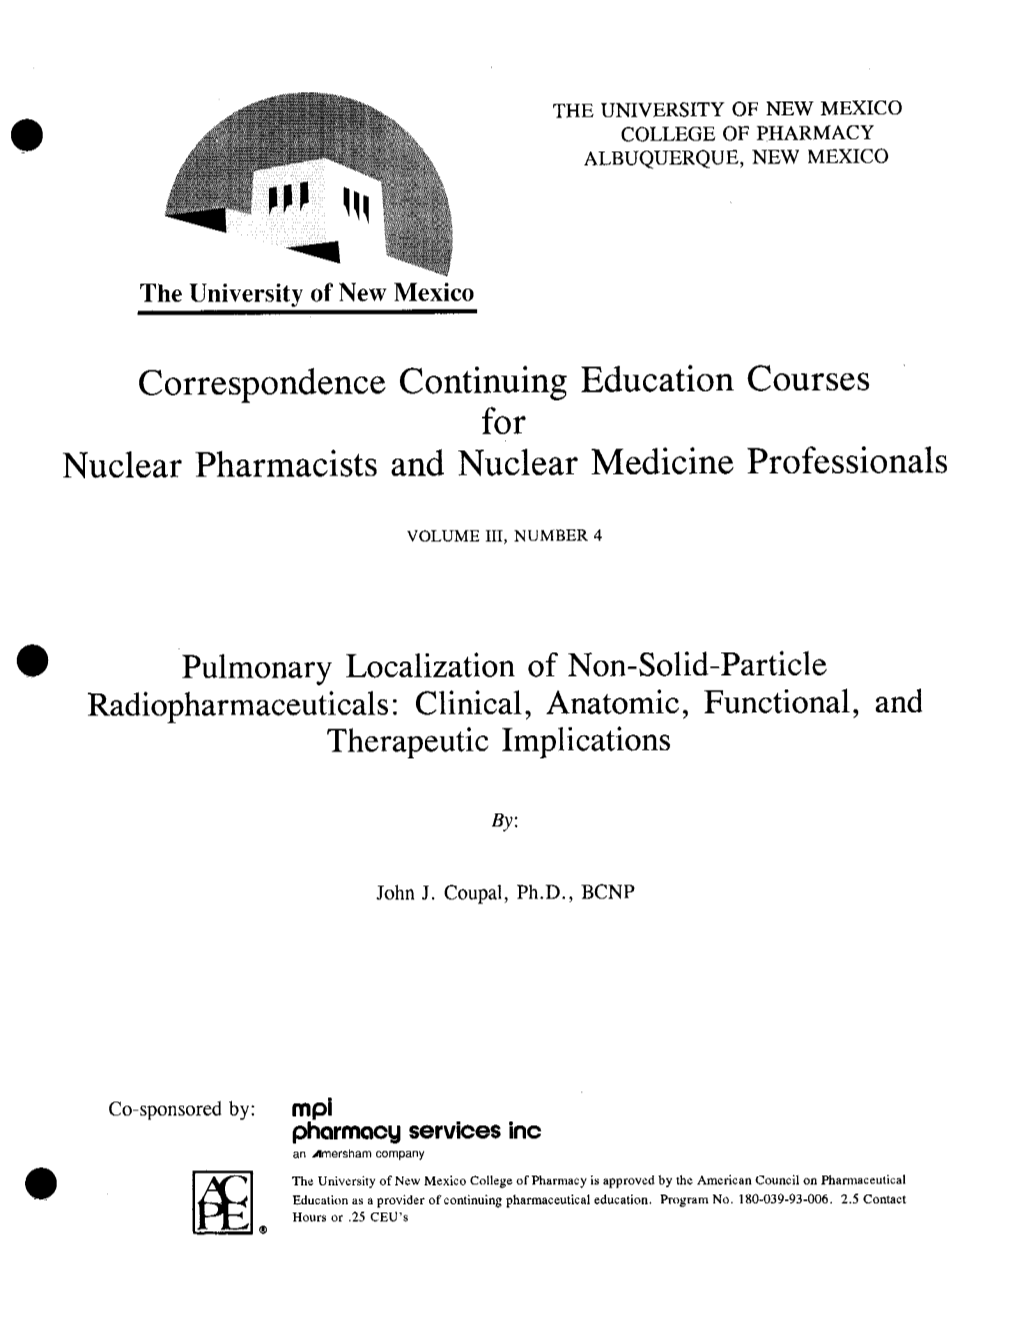 Correspondence Continuing Education Courses for Nuclear Pharmacists and Nuclear Medicine Professionals